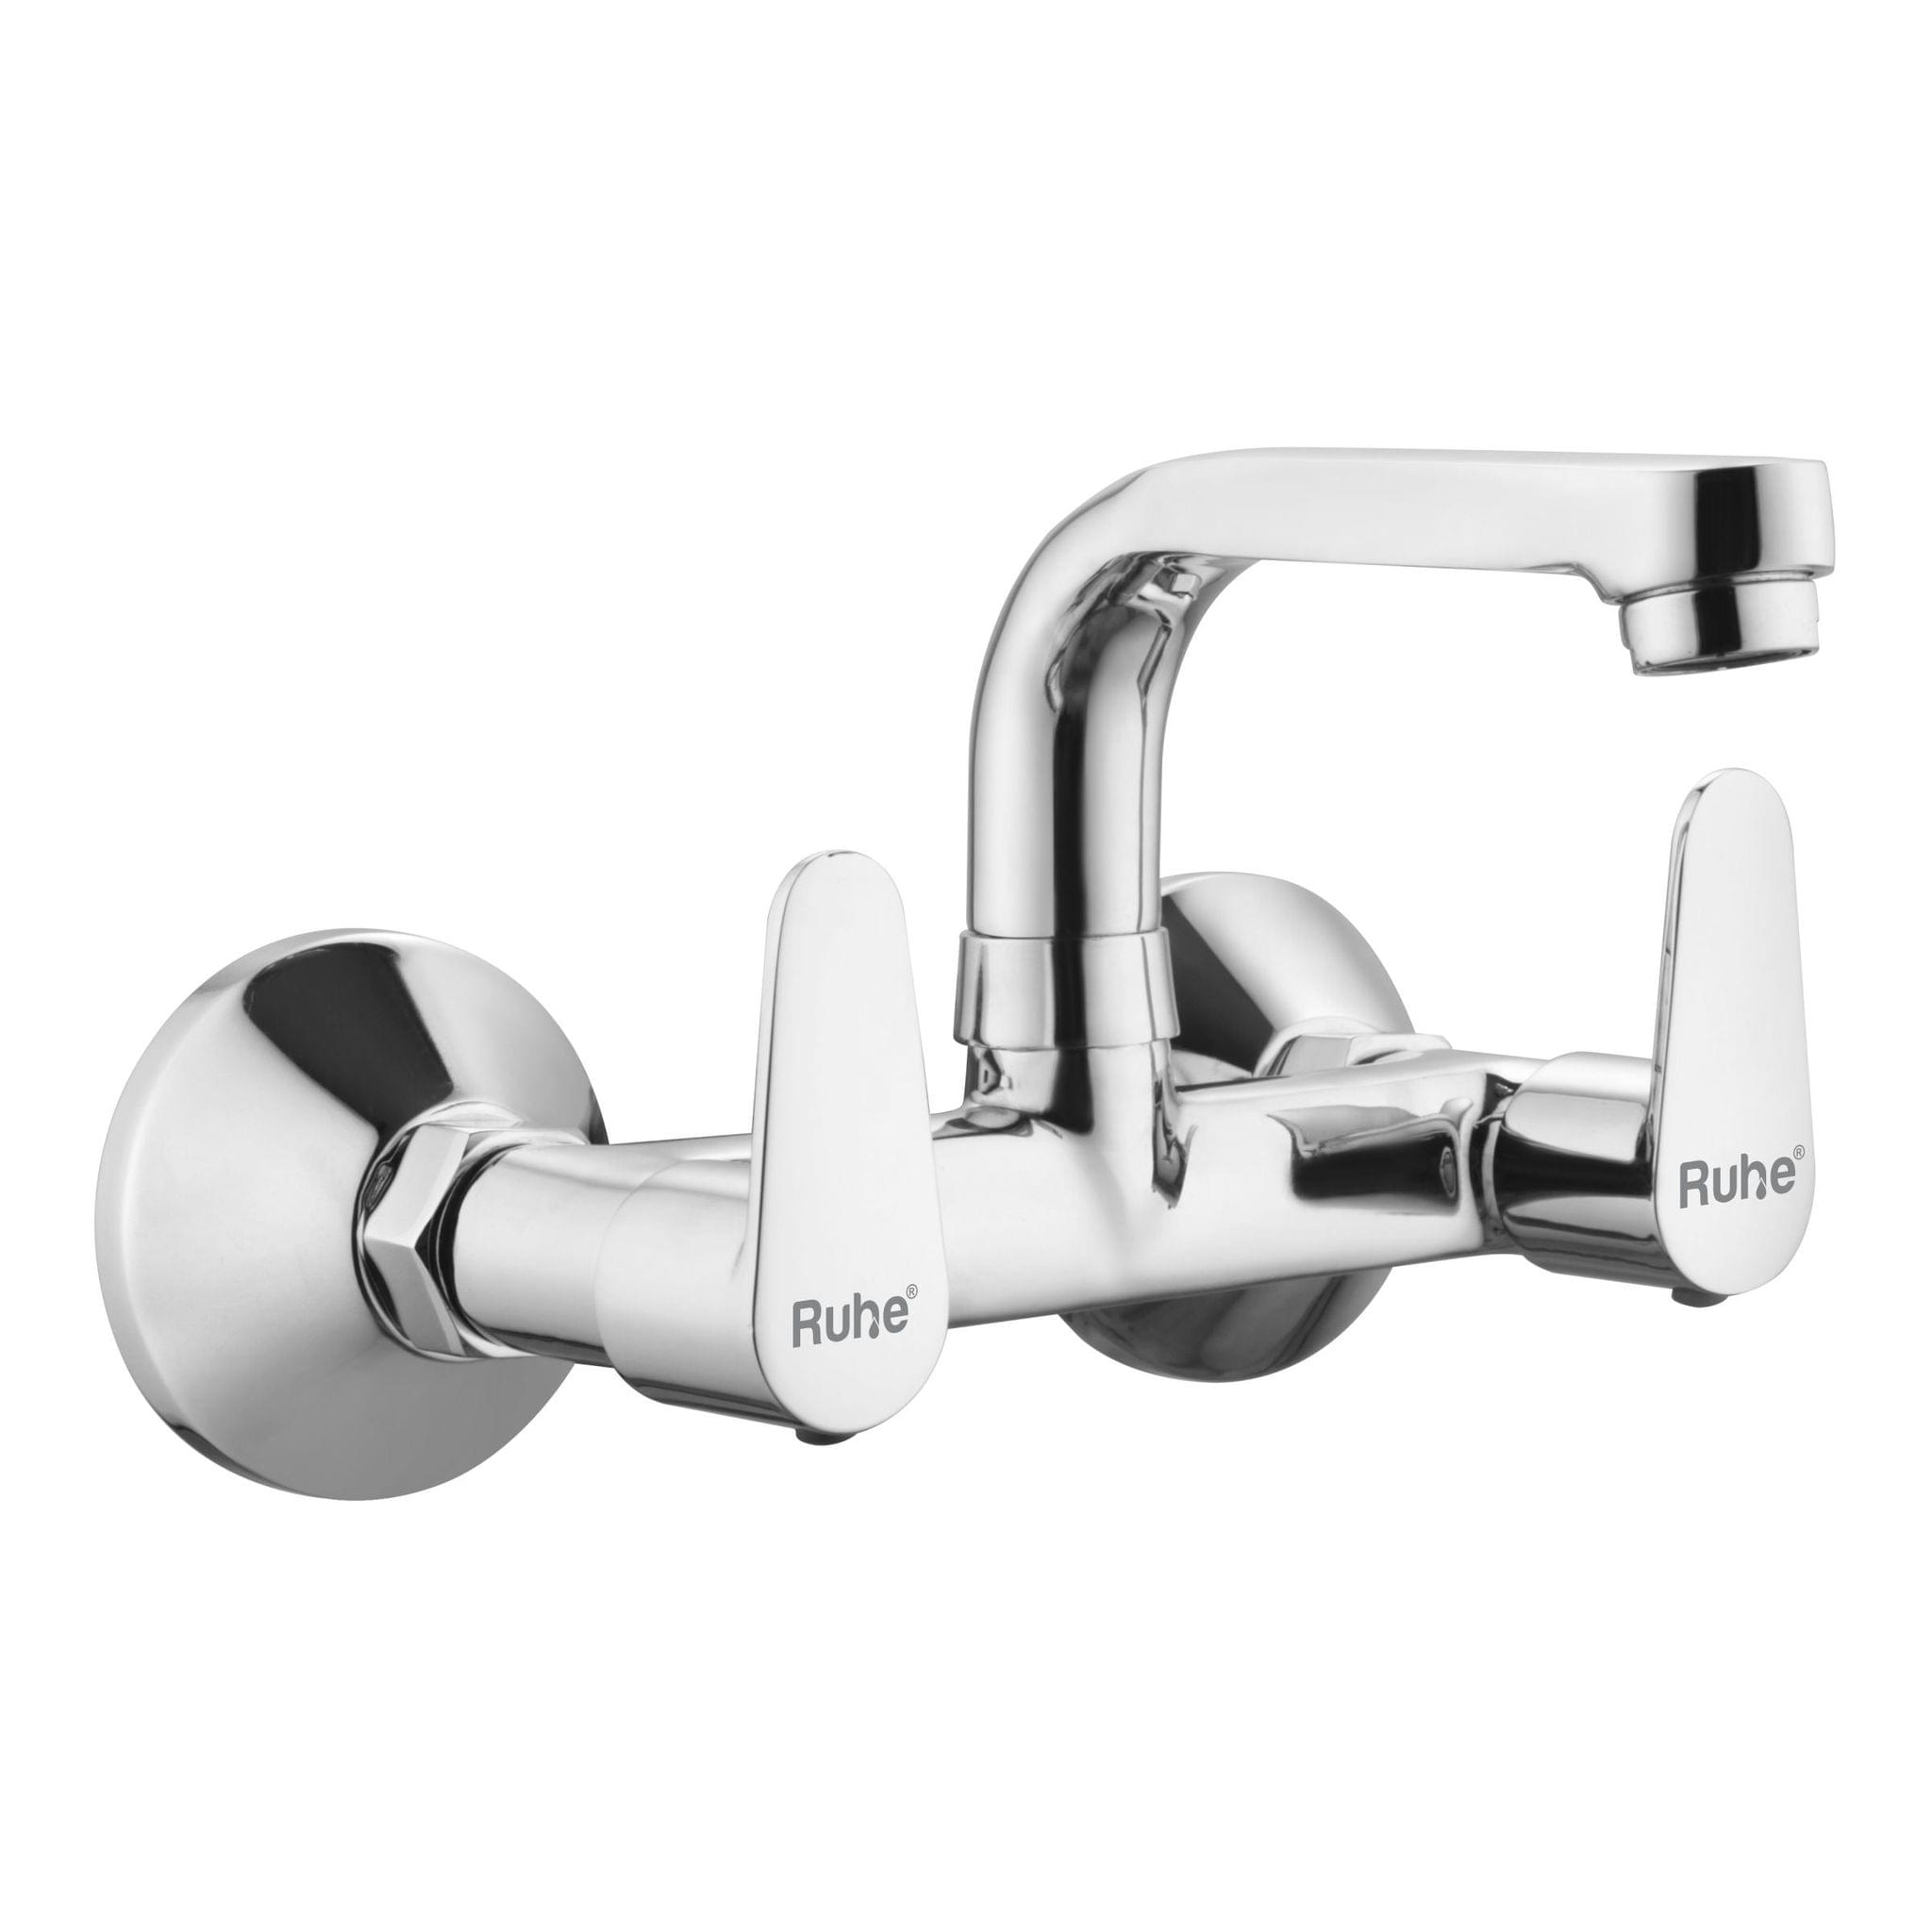 Eclipse Sink Mixer with Small (7 inches) Round Swivel Spout Faucet - by Ruhe®